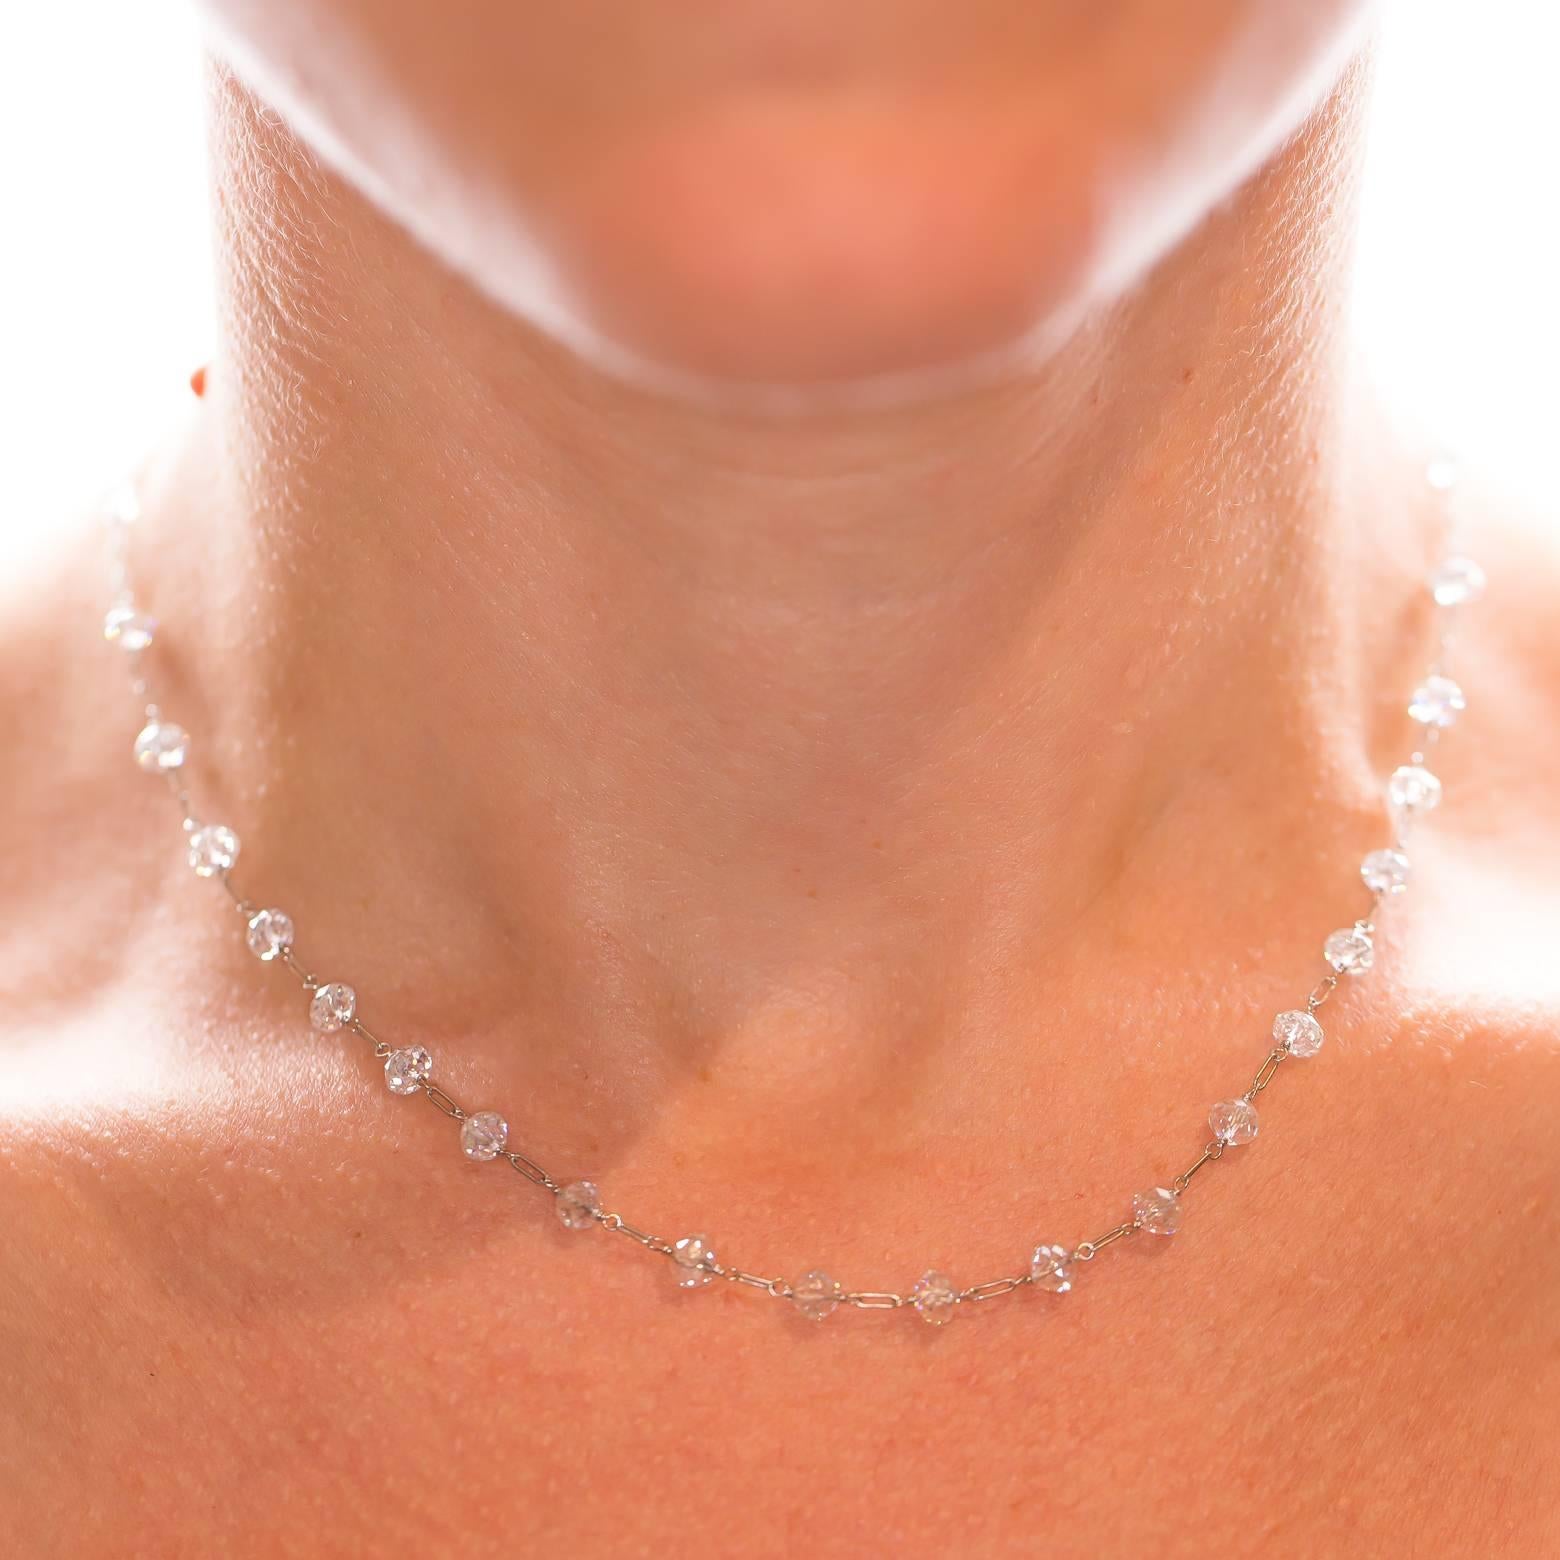 35 Carats Diamond Beads Facetted Platinum Chain Necklace In Excellent Condition For Sale In Berkeley, CA